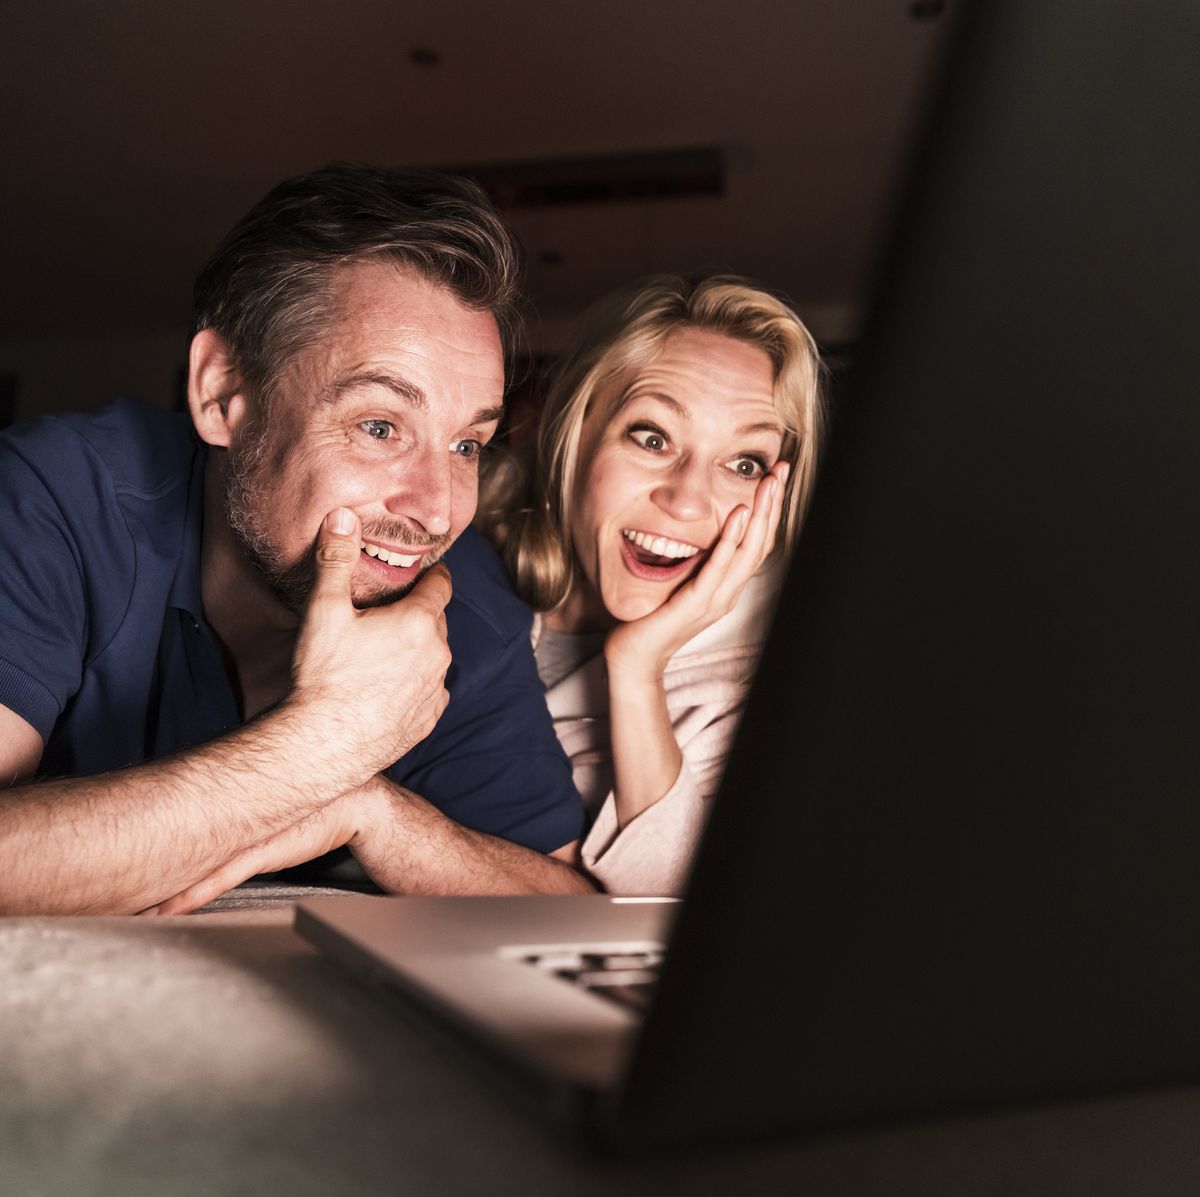 Laptop Fuck See Girl - Pornography and relationships: what to do if your partner watches porn